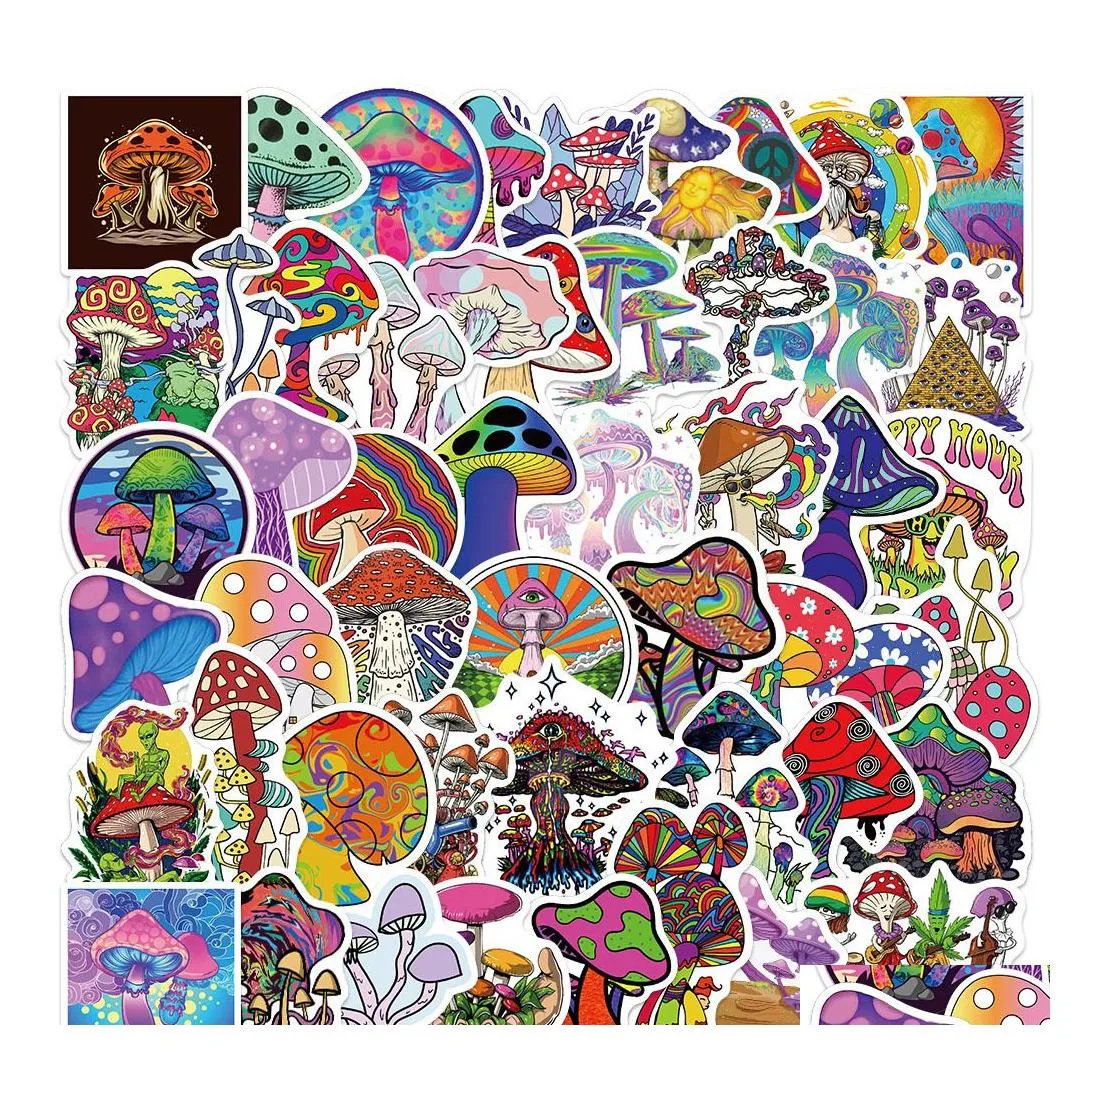 Car Stickers 50Pcs Psychedelic Aesthetics Mushroom Decal Guitar Motorcycle Lage Suitcase Cartoon Graffiti Sticker Drop Delivery Mobi Dhbz3